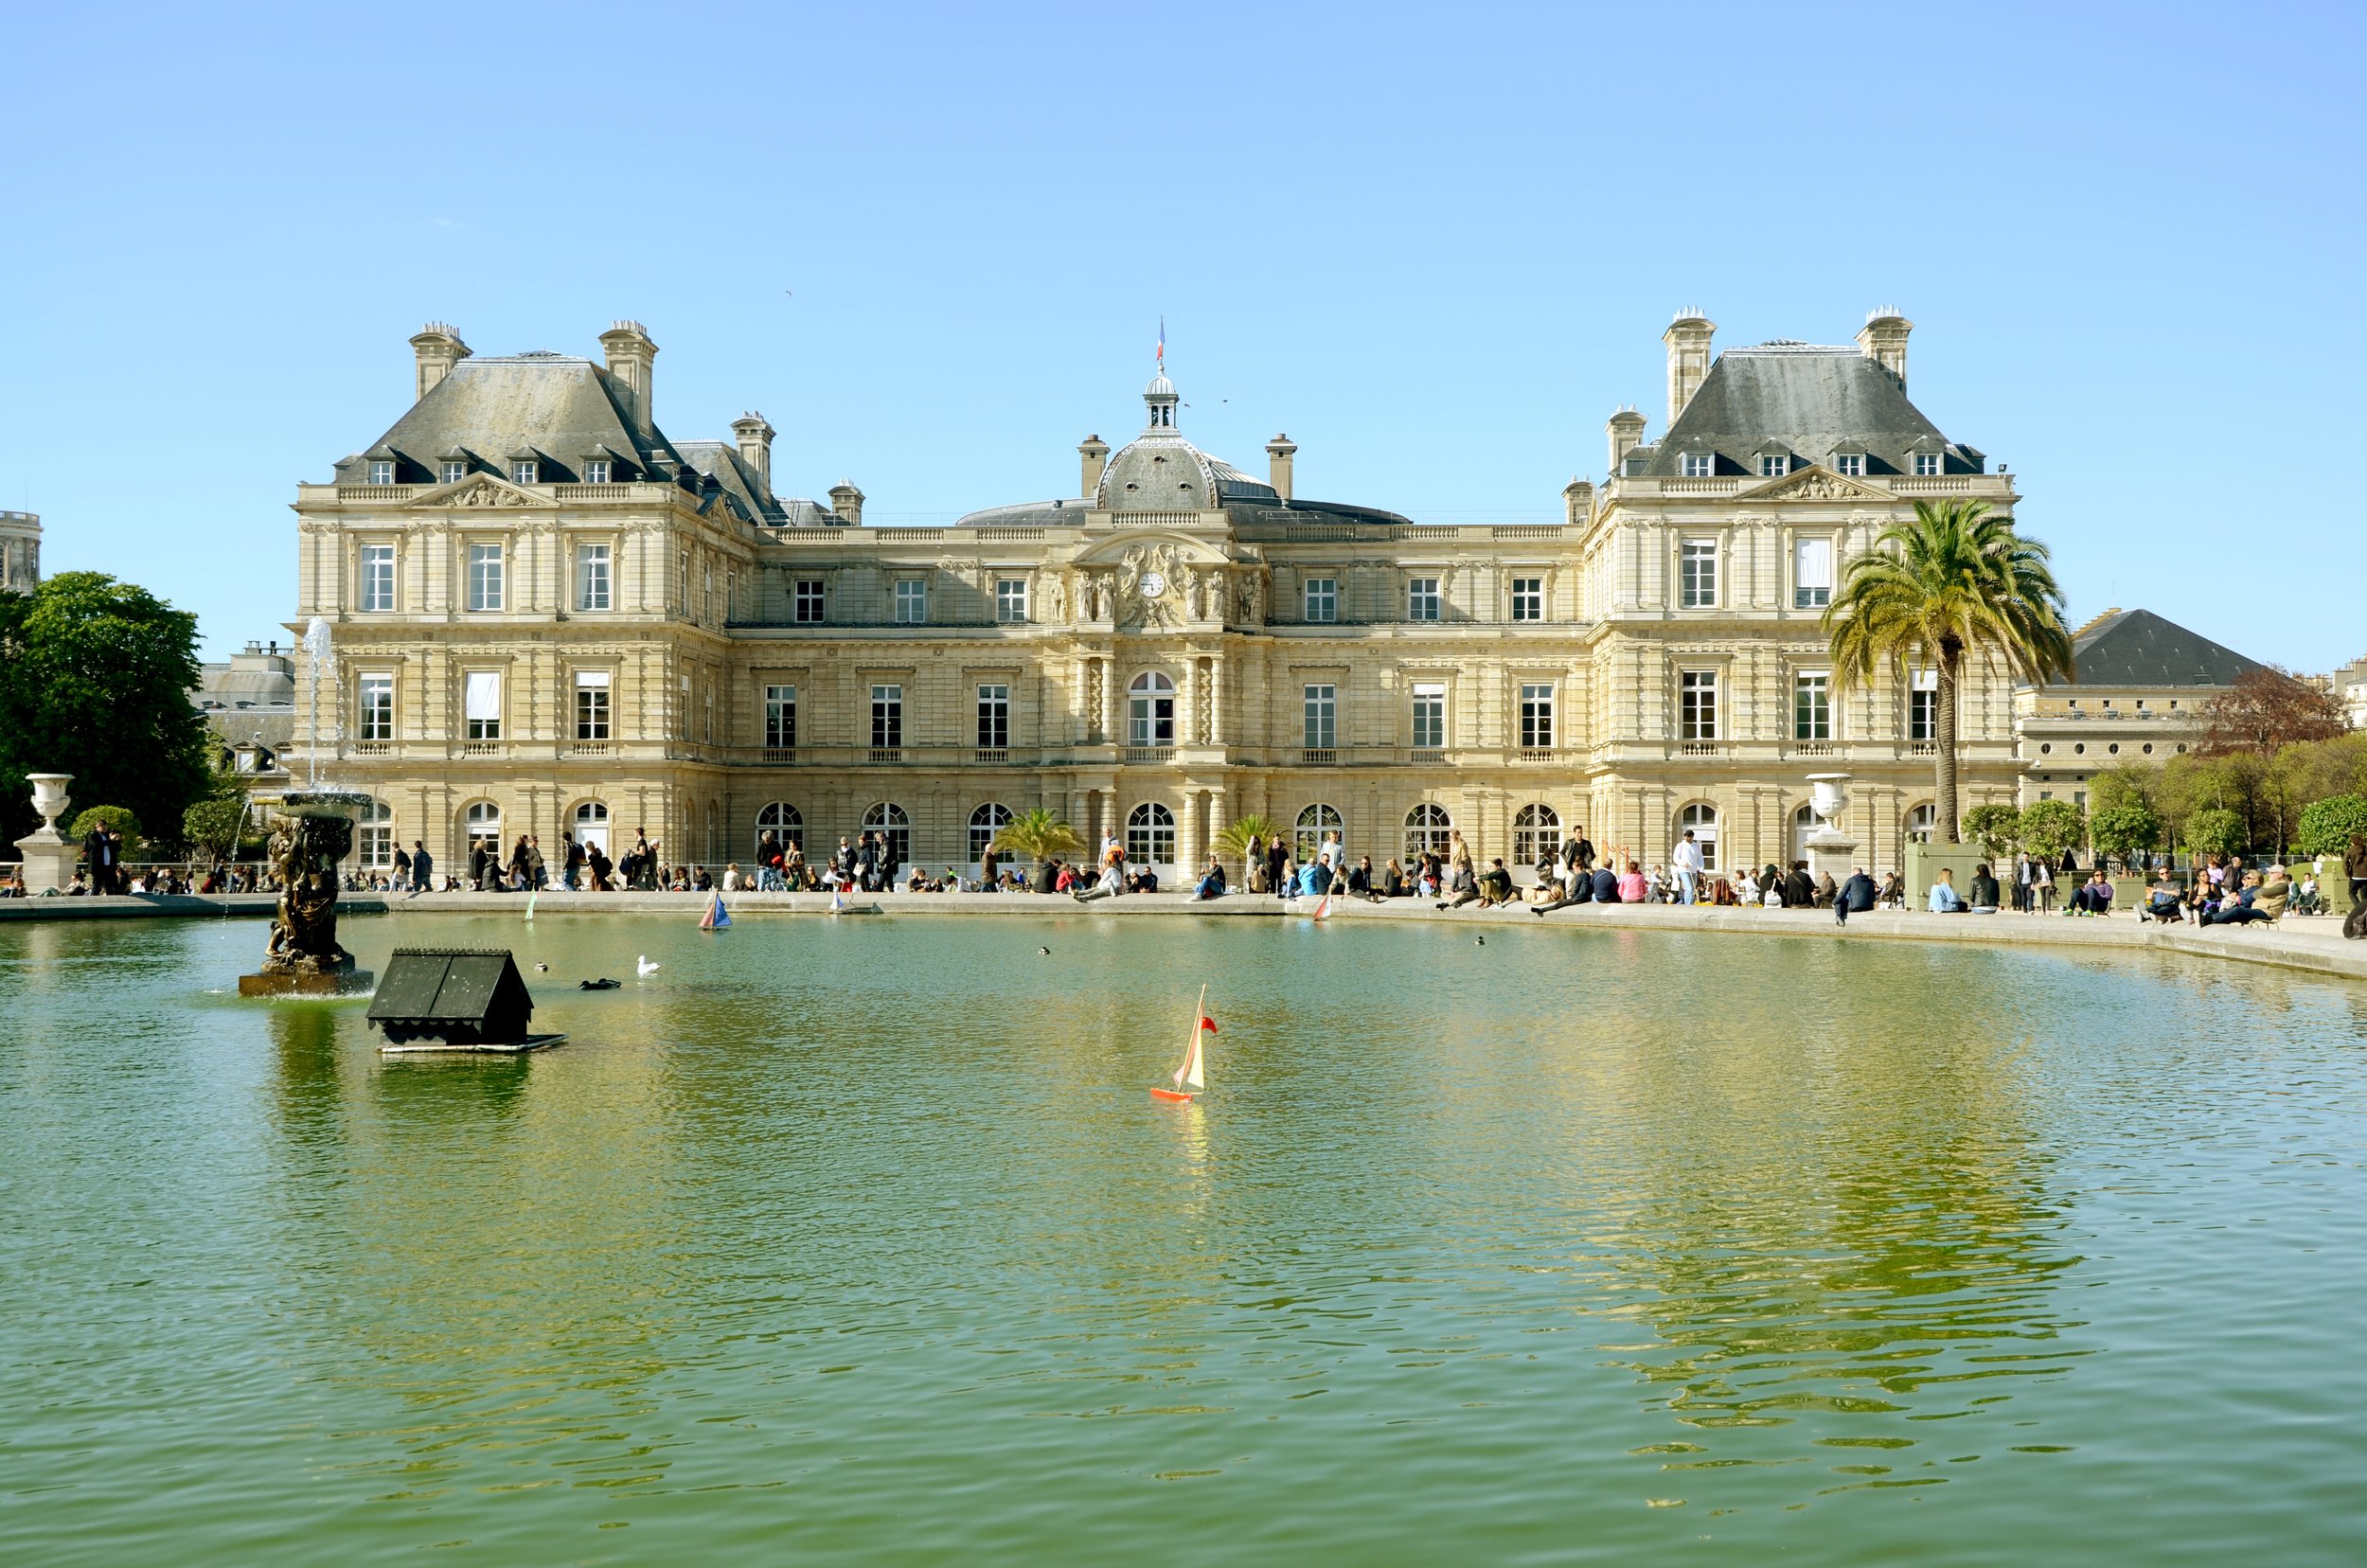 BOATS BASSIN IN FRONT OF THE SENAT BUILDING.jpg